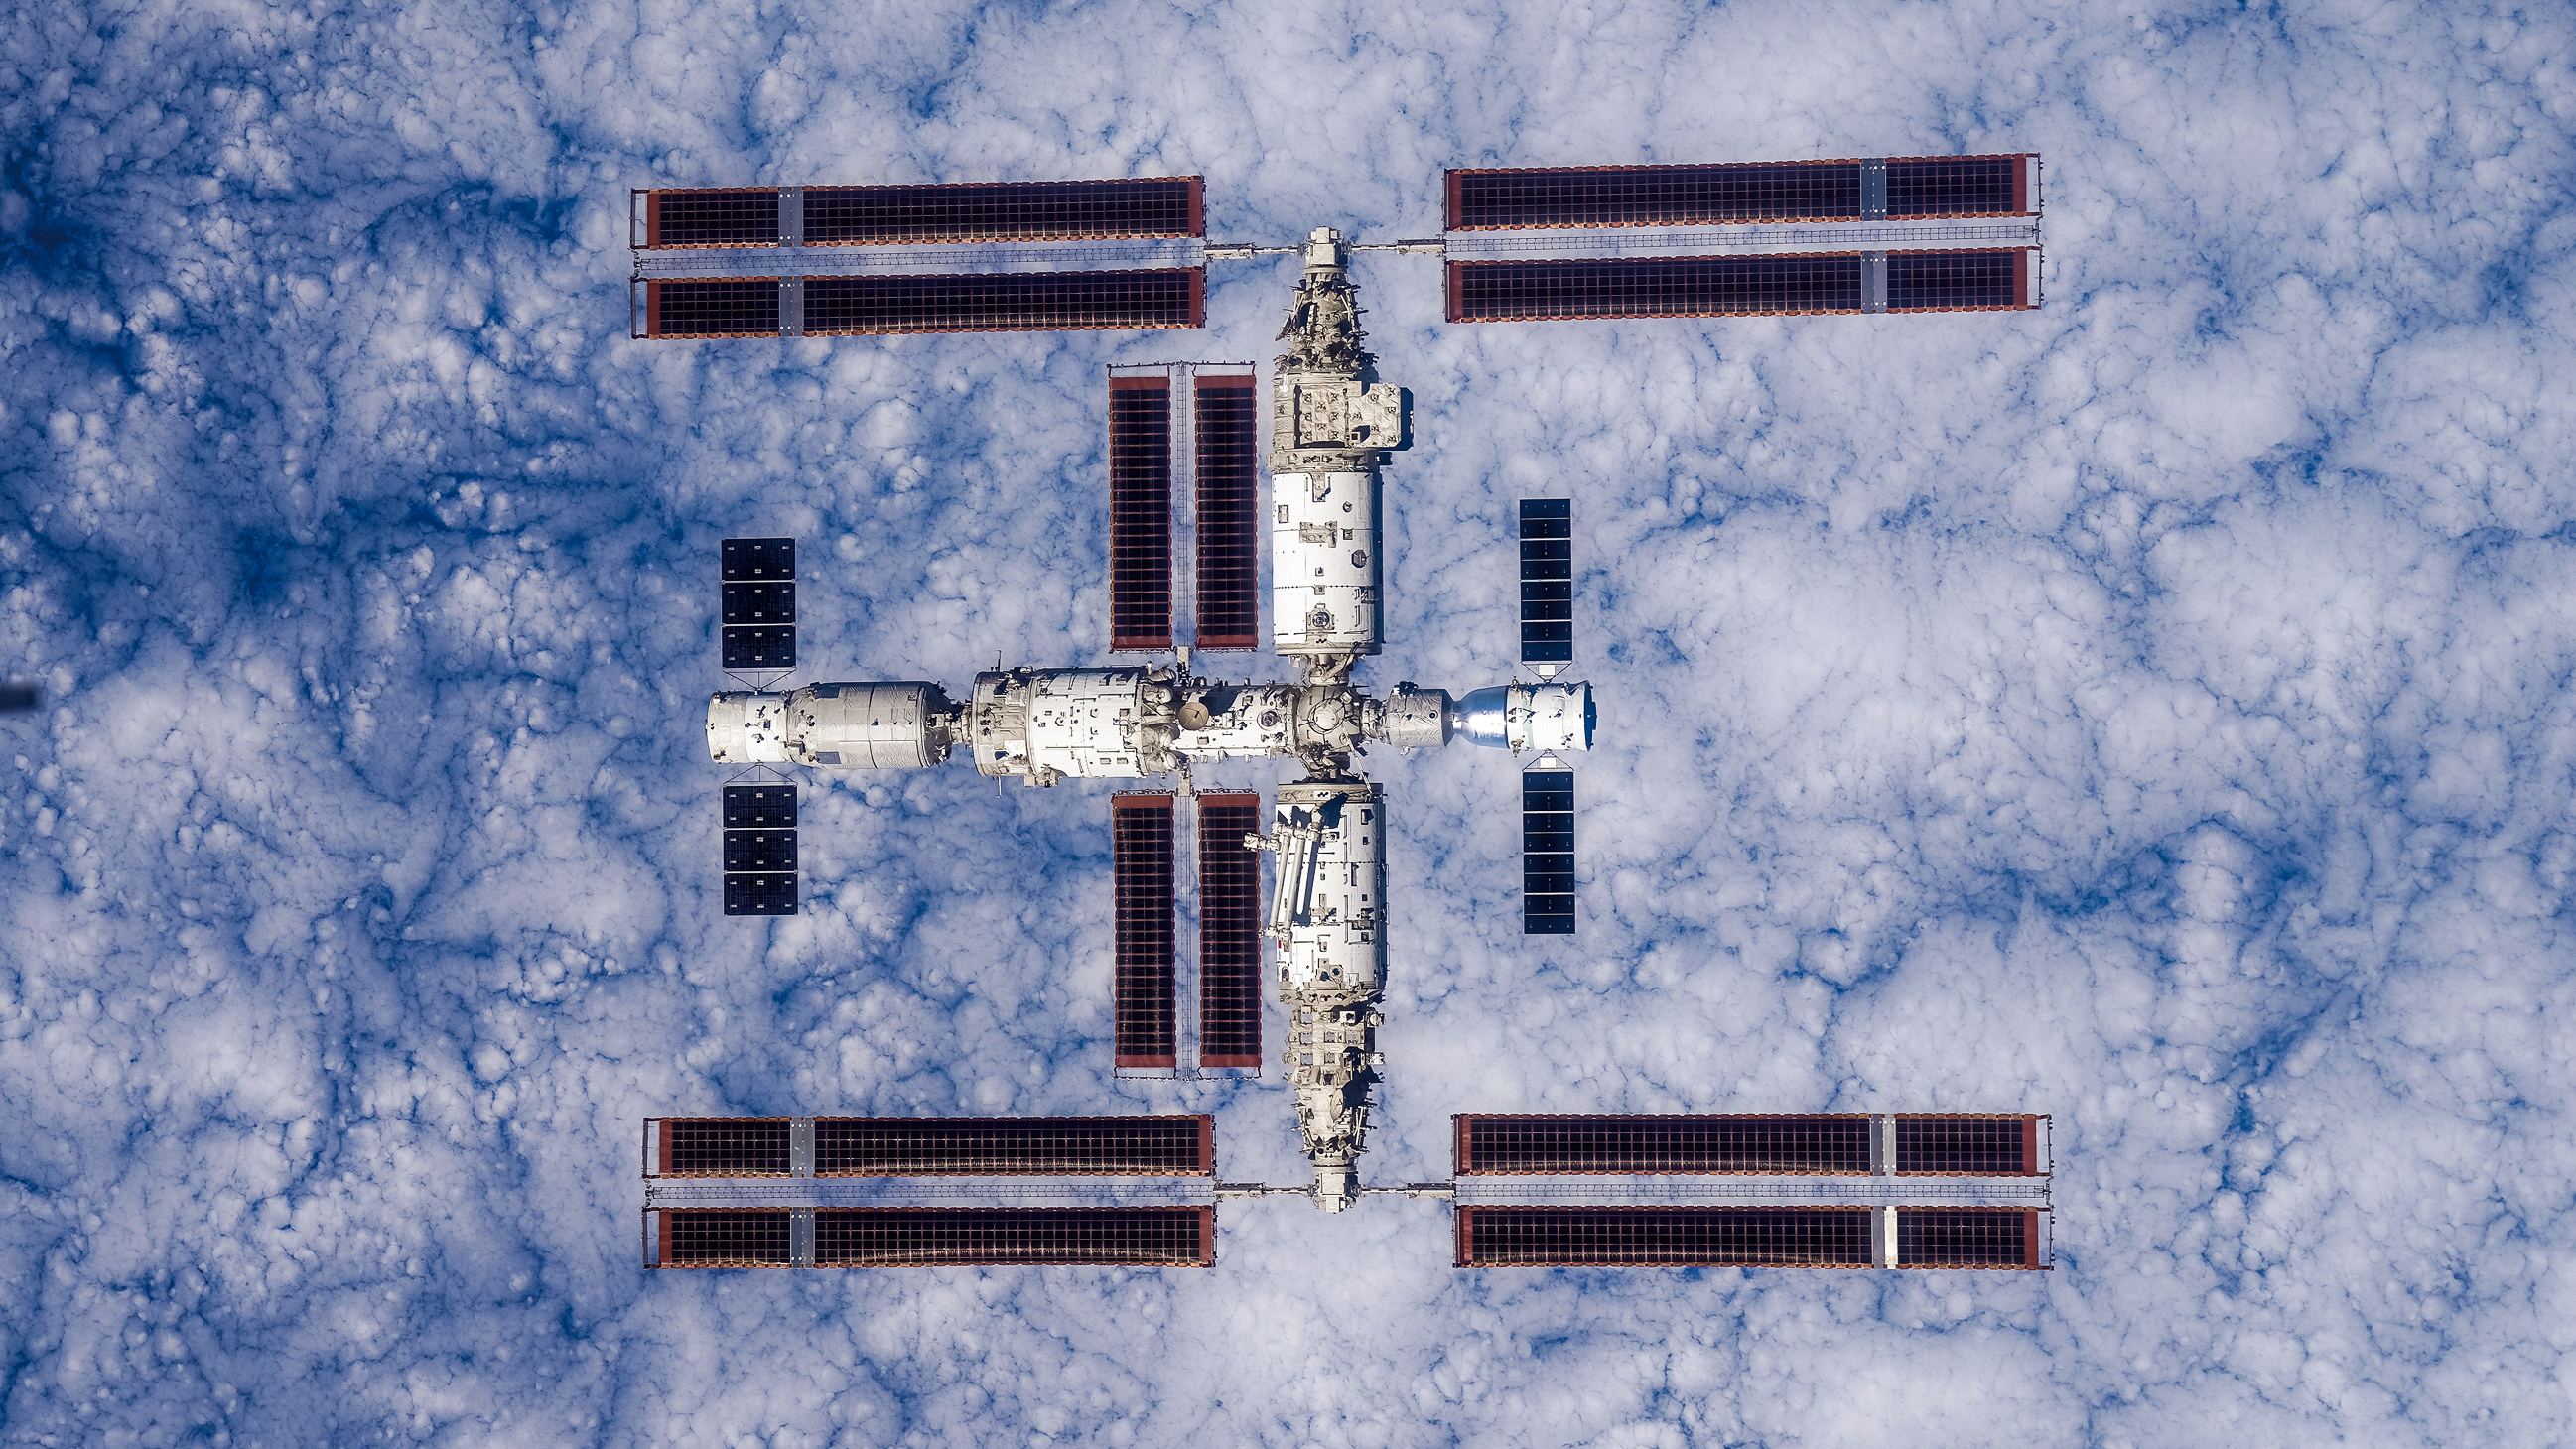 General 2595x1460 space station universe Tiangong Space Station China top view technology minimalism